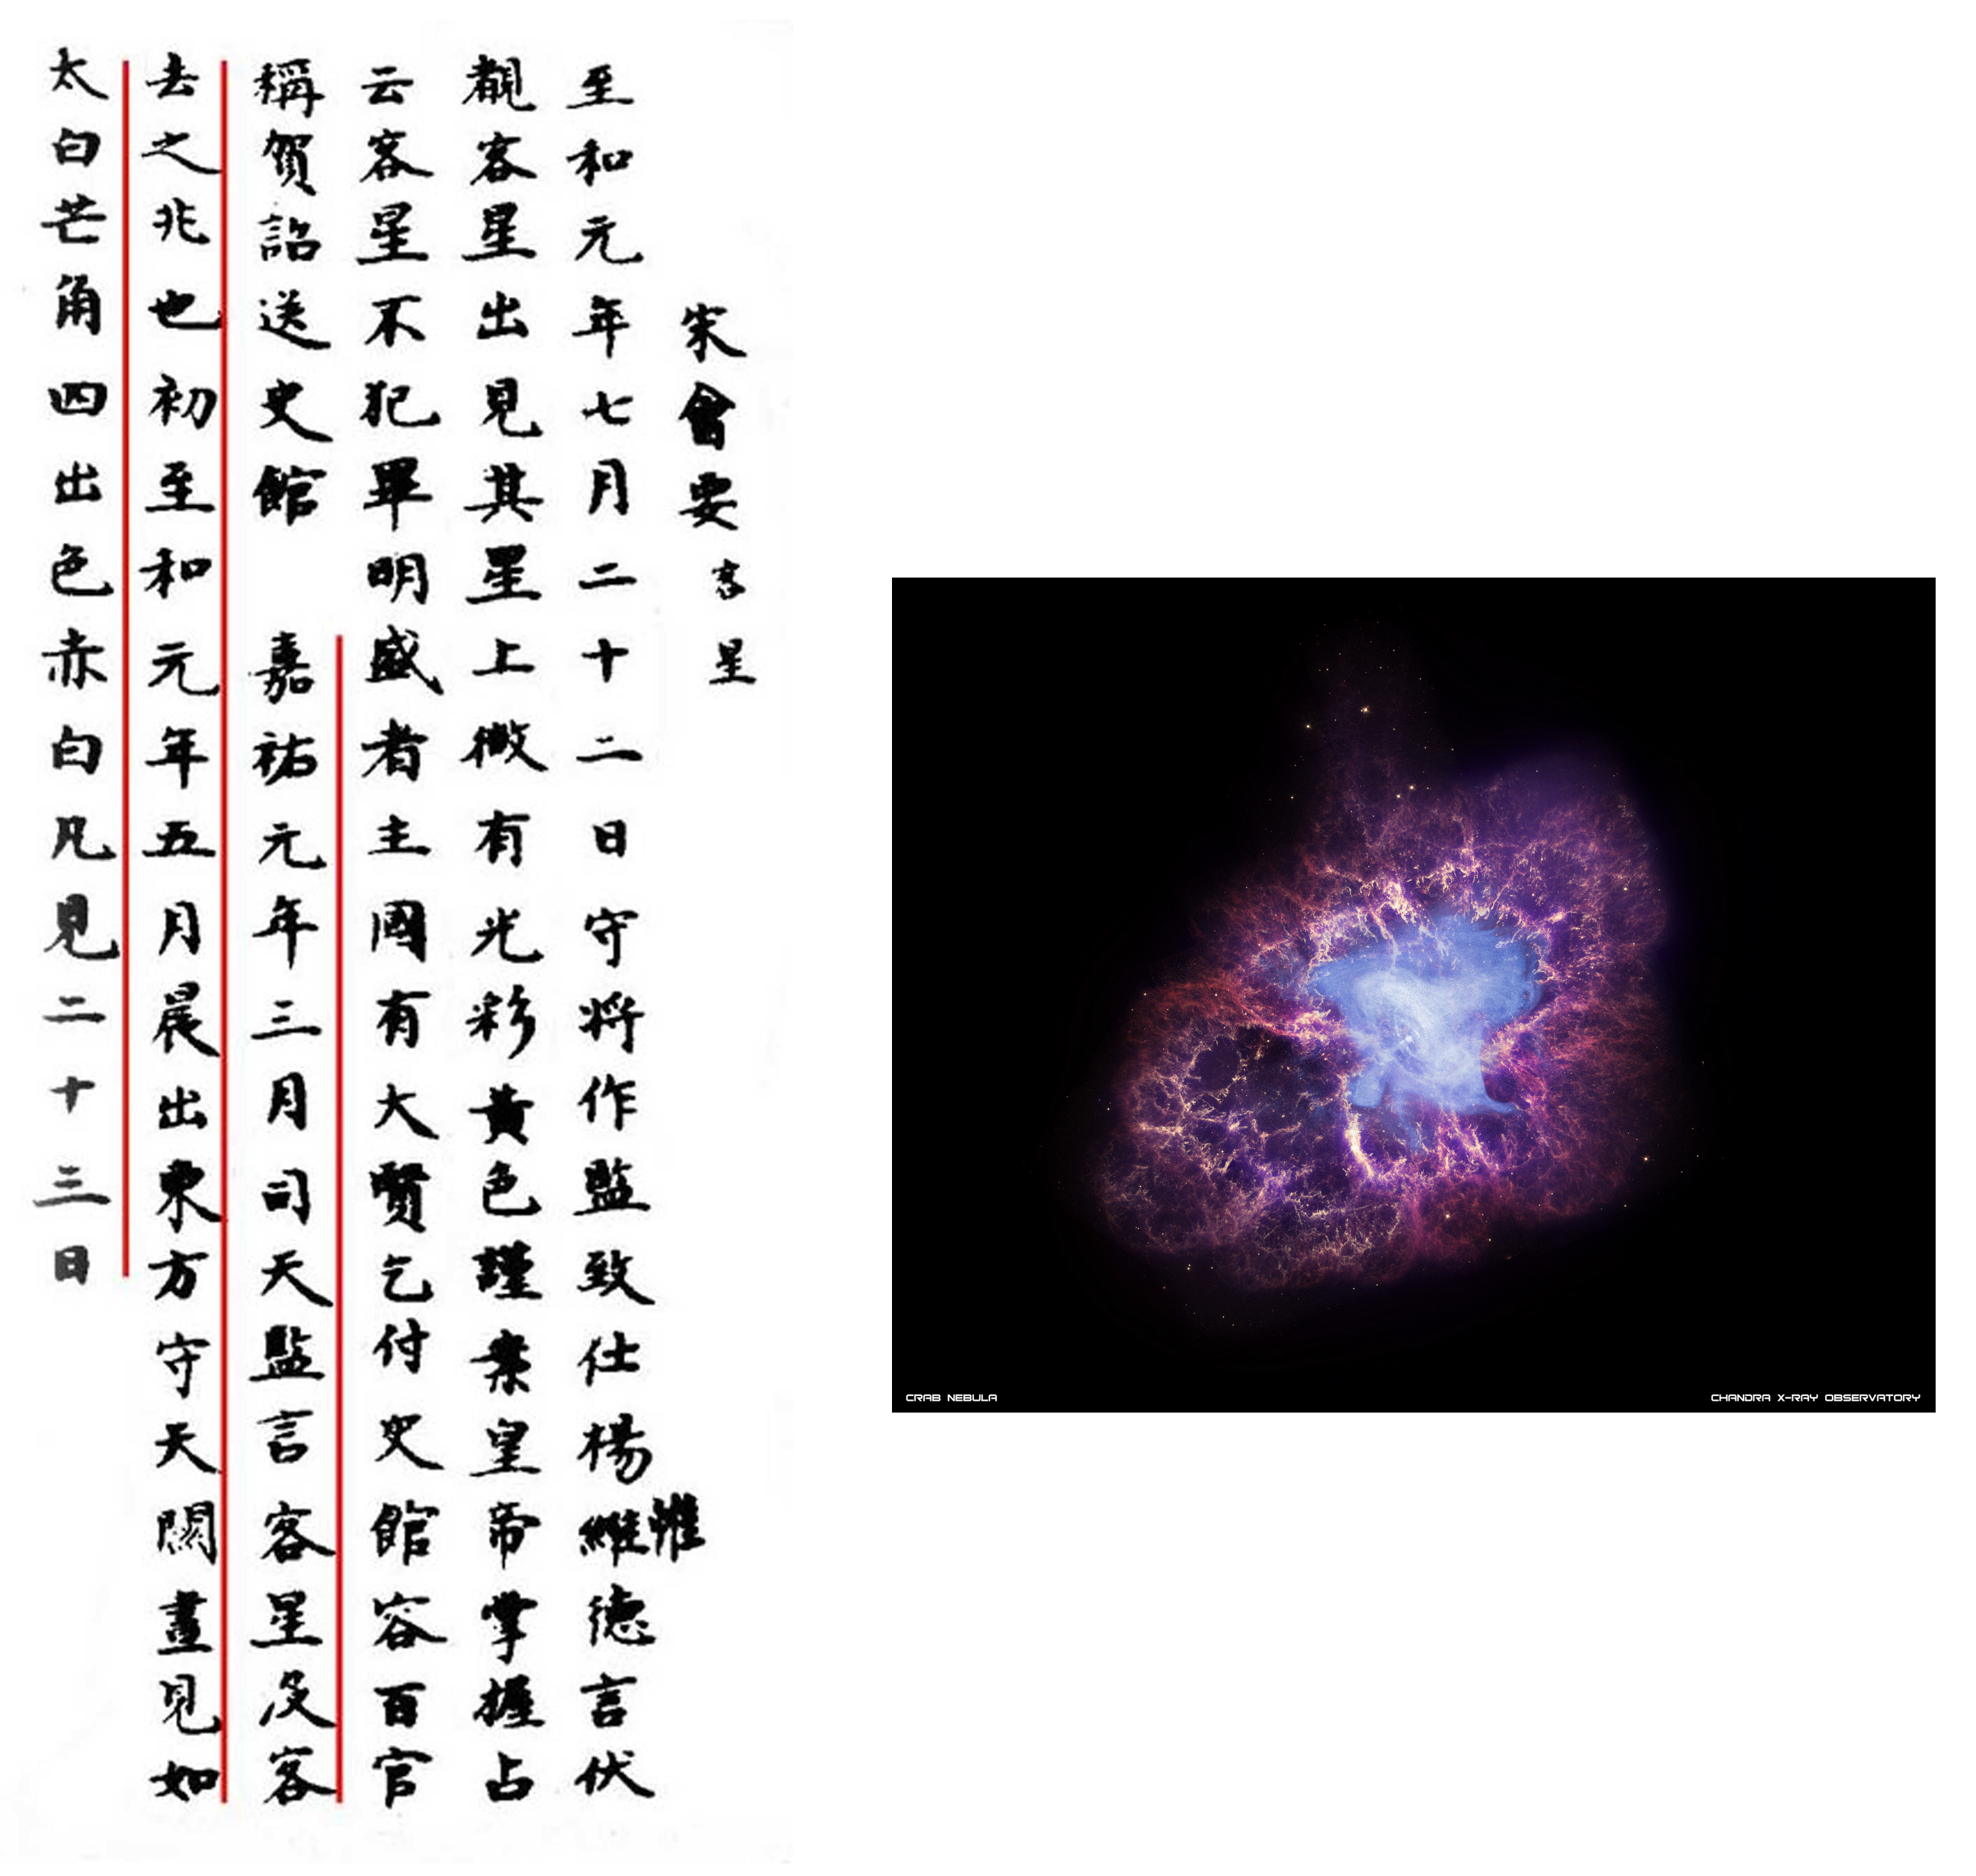 One of the accounts of the Song dynasty describing the appearance of the Crab supernova